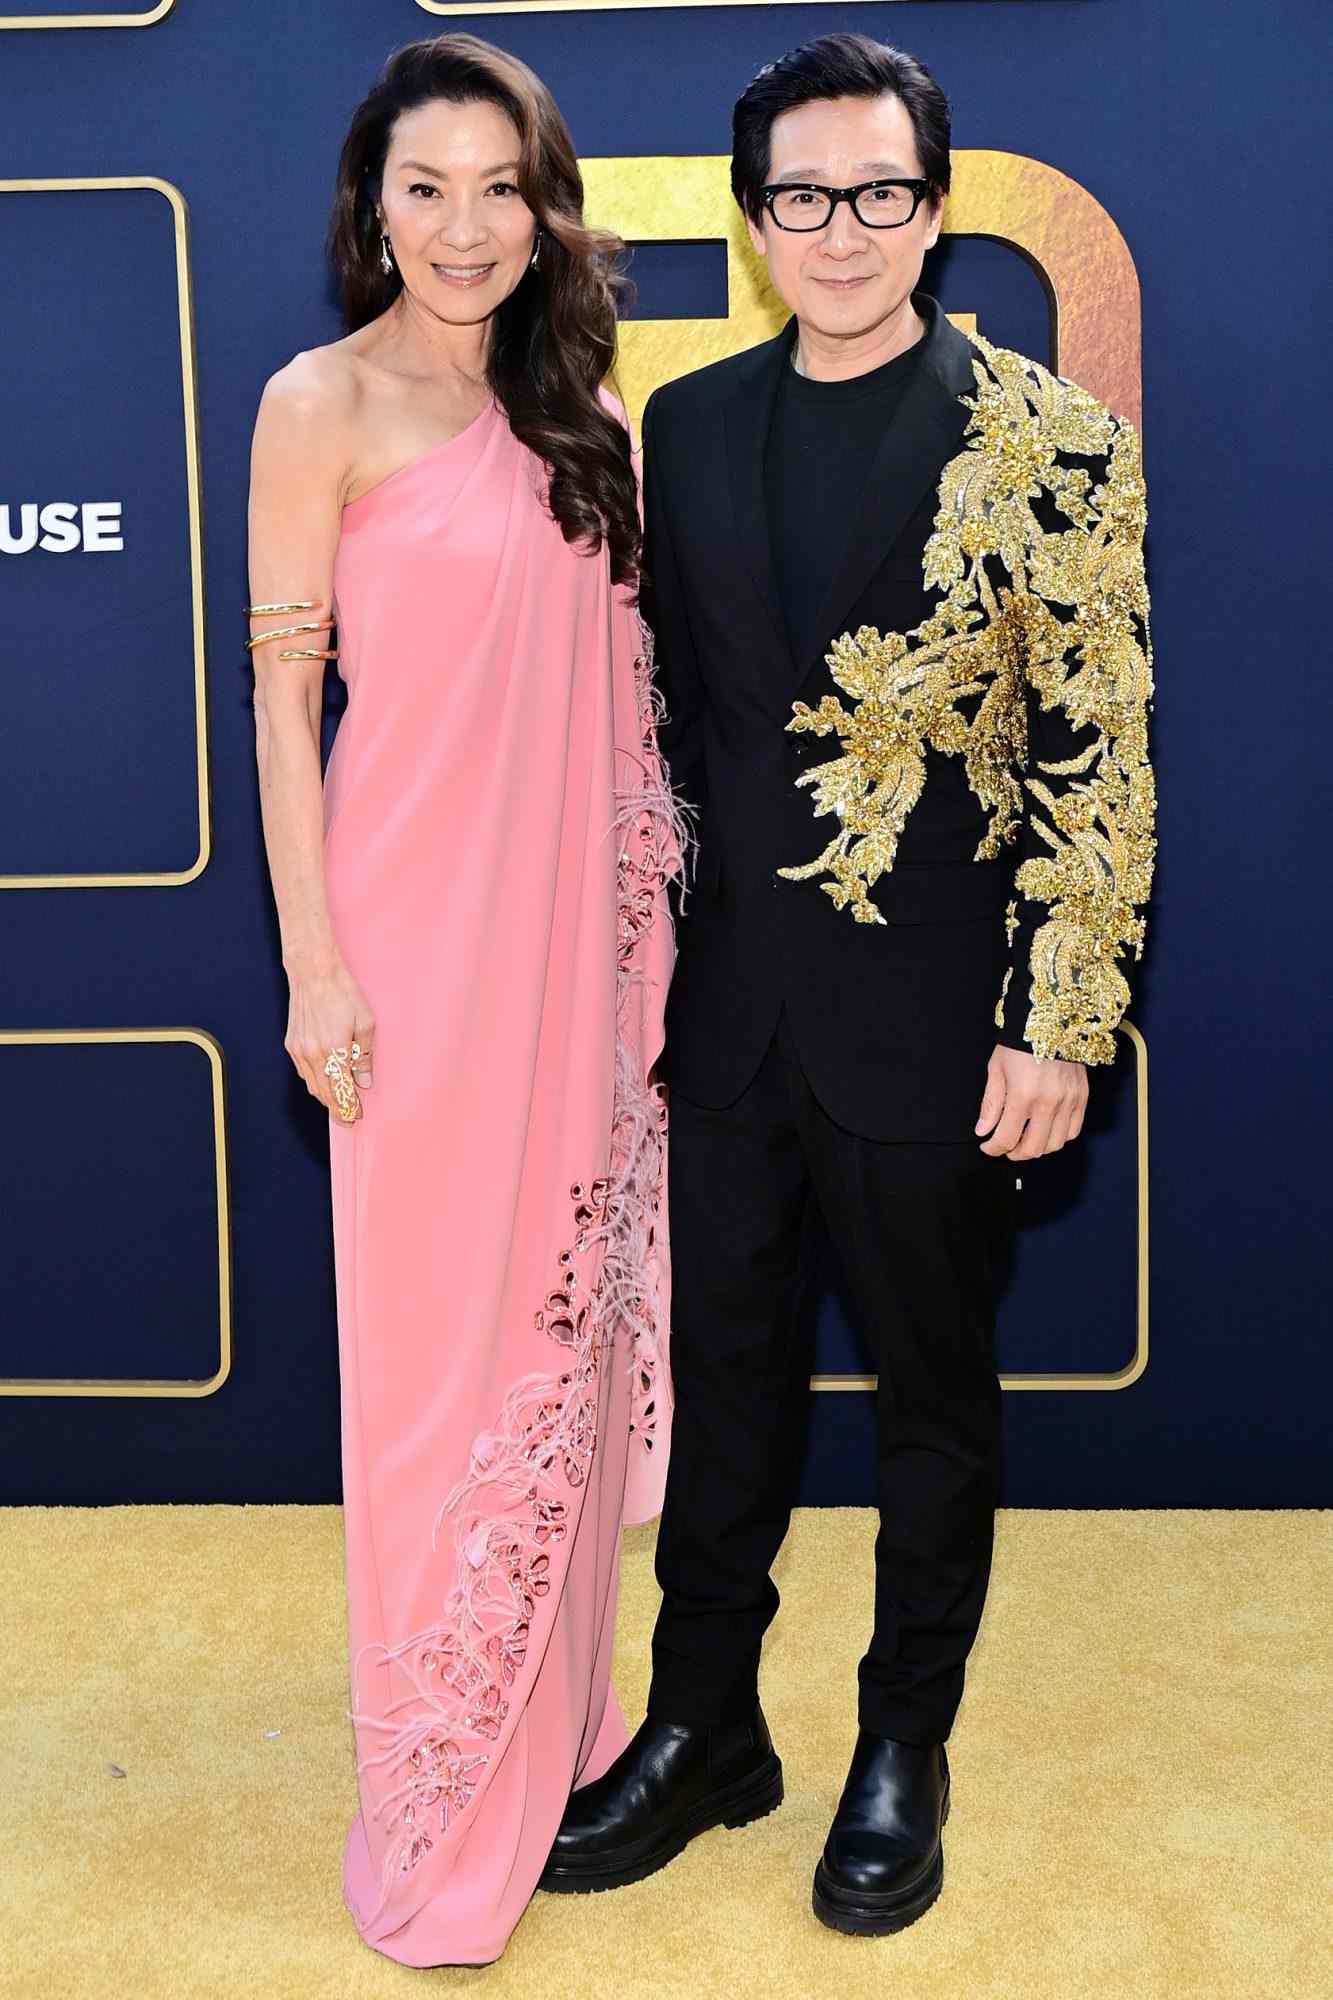 LOS ANGELES, CALIFORNIA - MAY 21: (L-R) Michelle Yeoh and Ke Huy Quan attend Gold House's Inaugural Gold Gala: A New Gold Age at Vibiana on May 21, 2022 in Los Angeles, California. (Photo by Stefanie Keenan/Getty Images for Gold House)